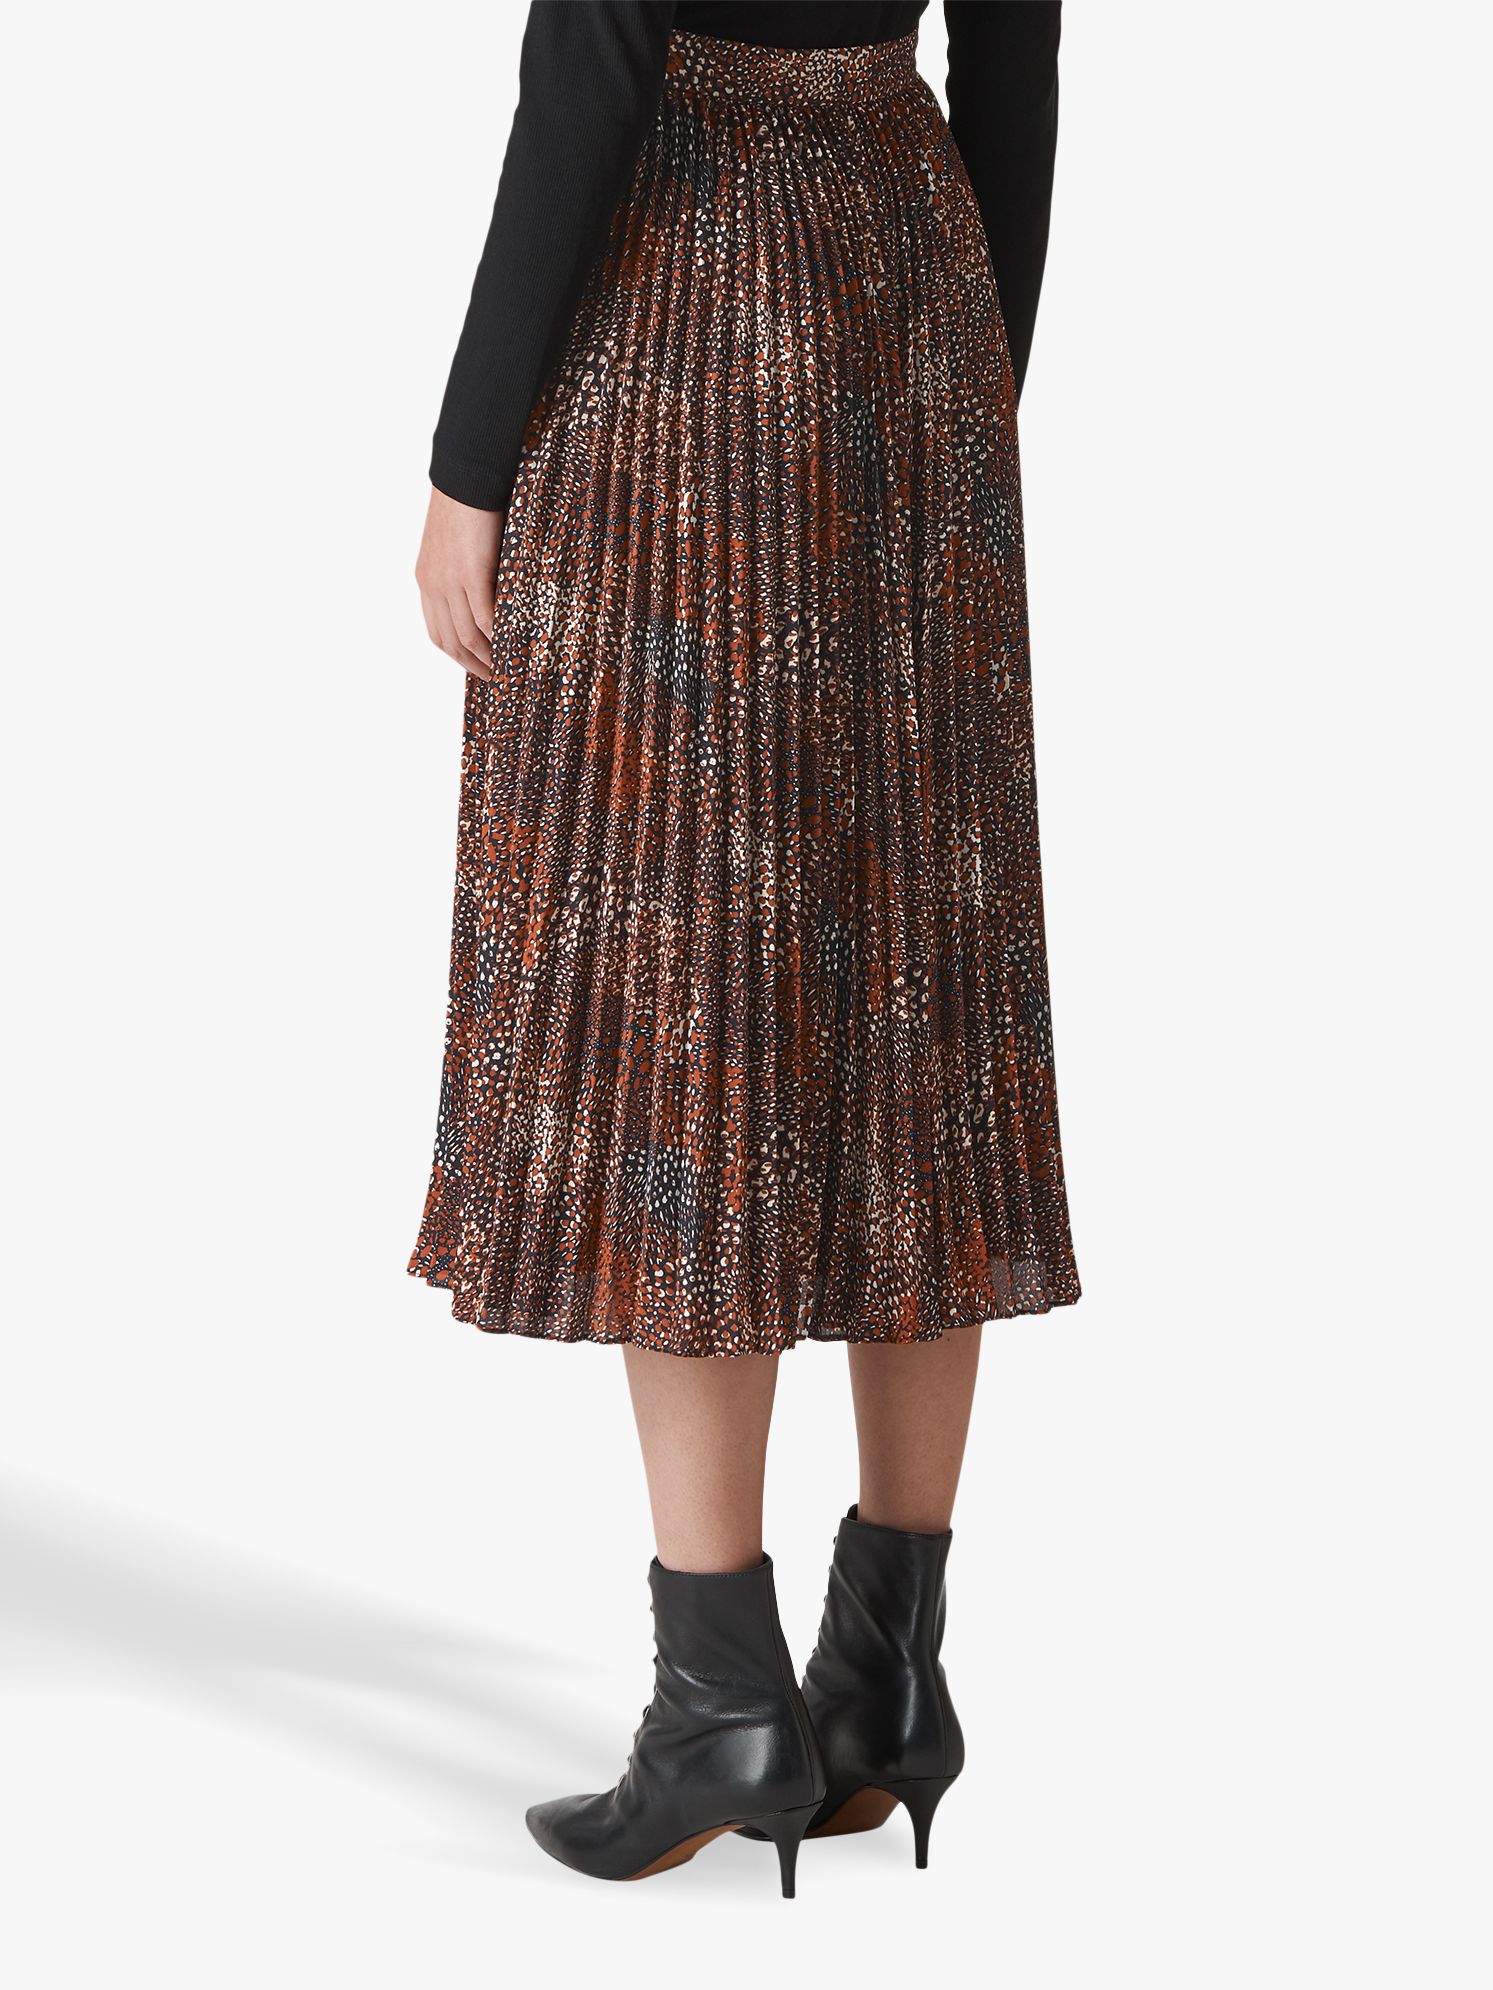 Whistles Abstract Animal Print Pleated Skirt, Brown/Multi